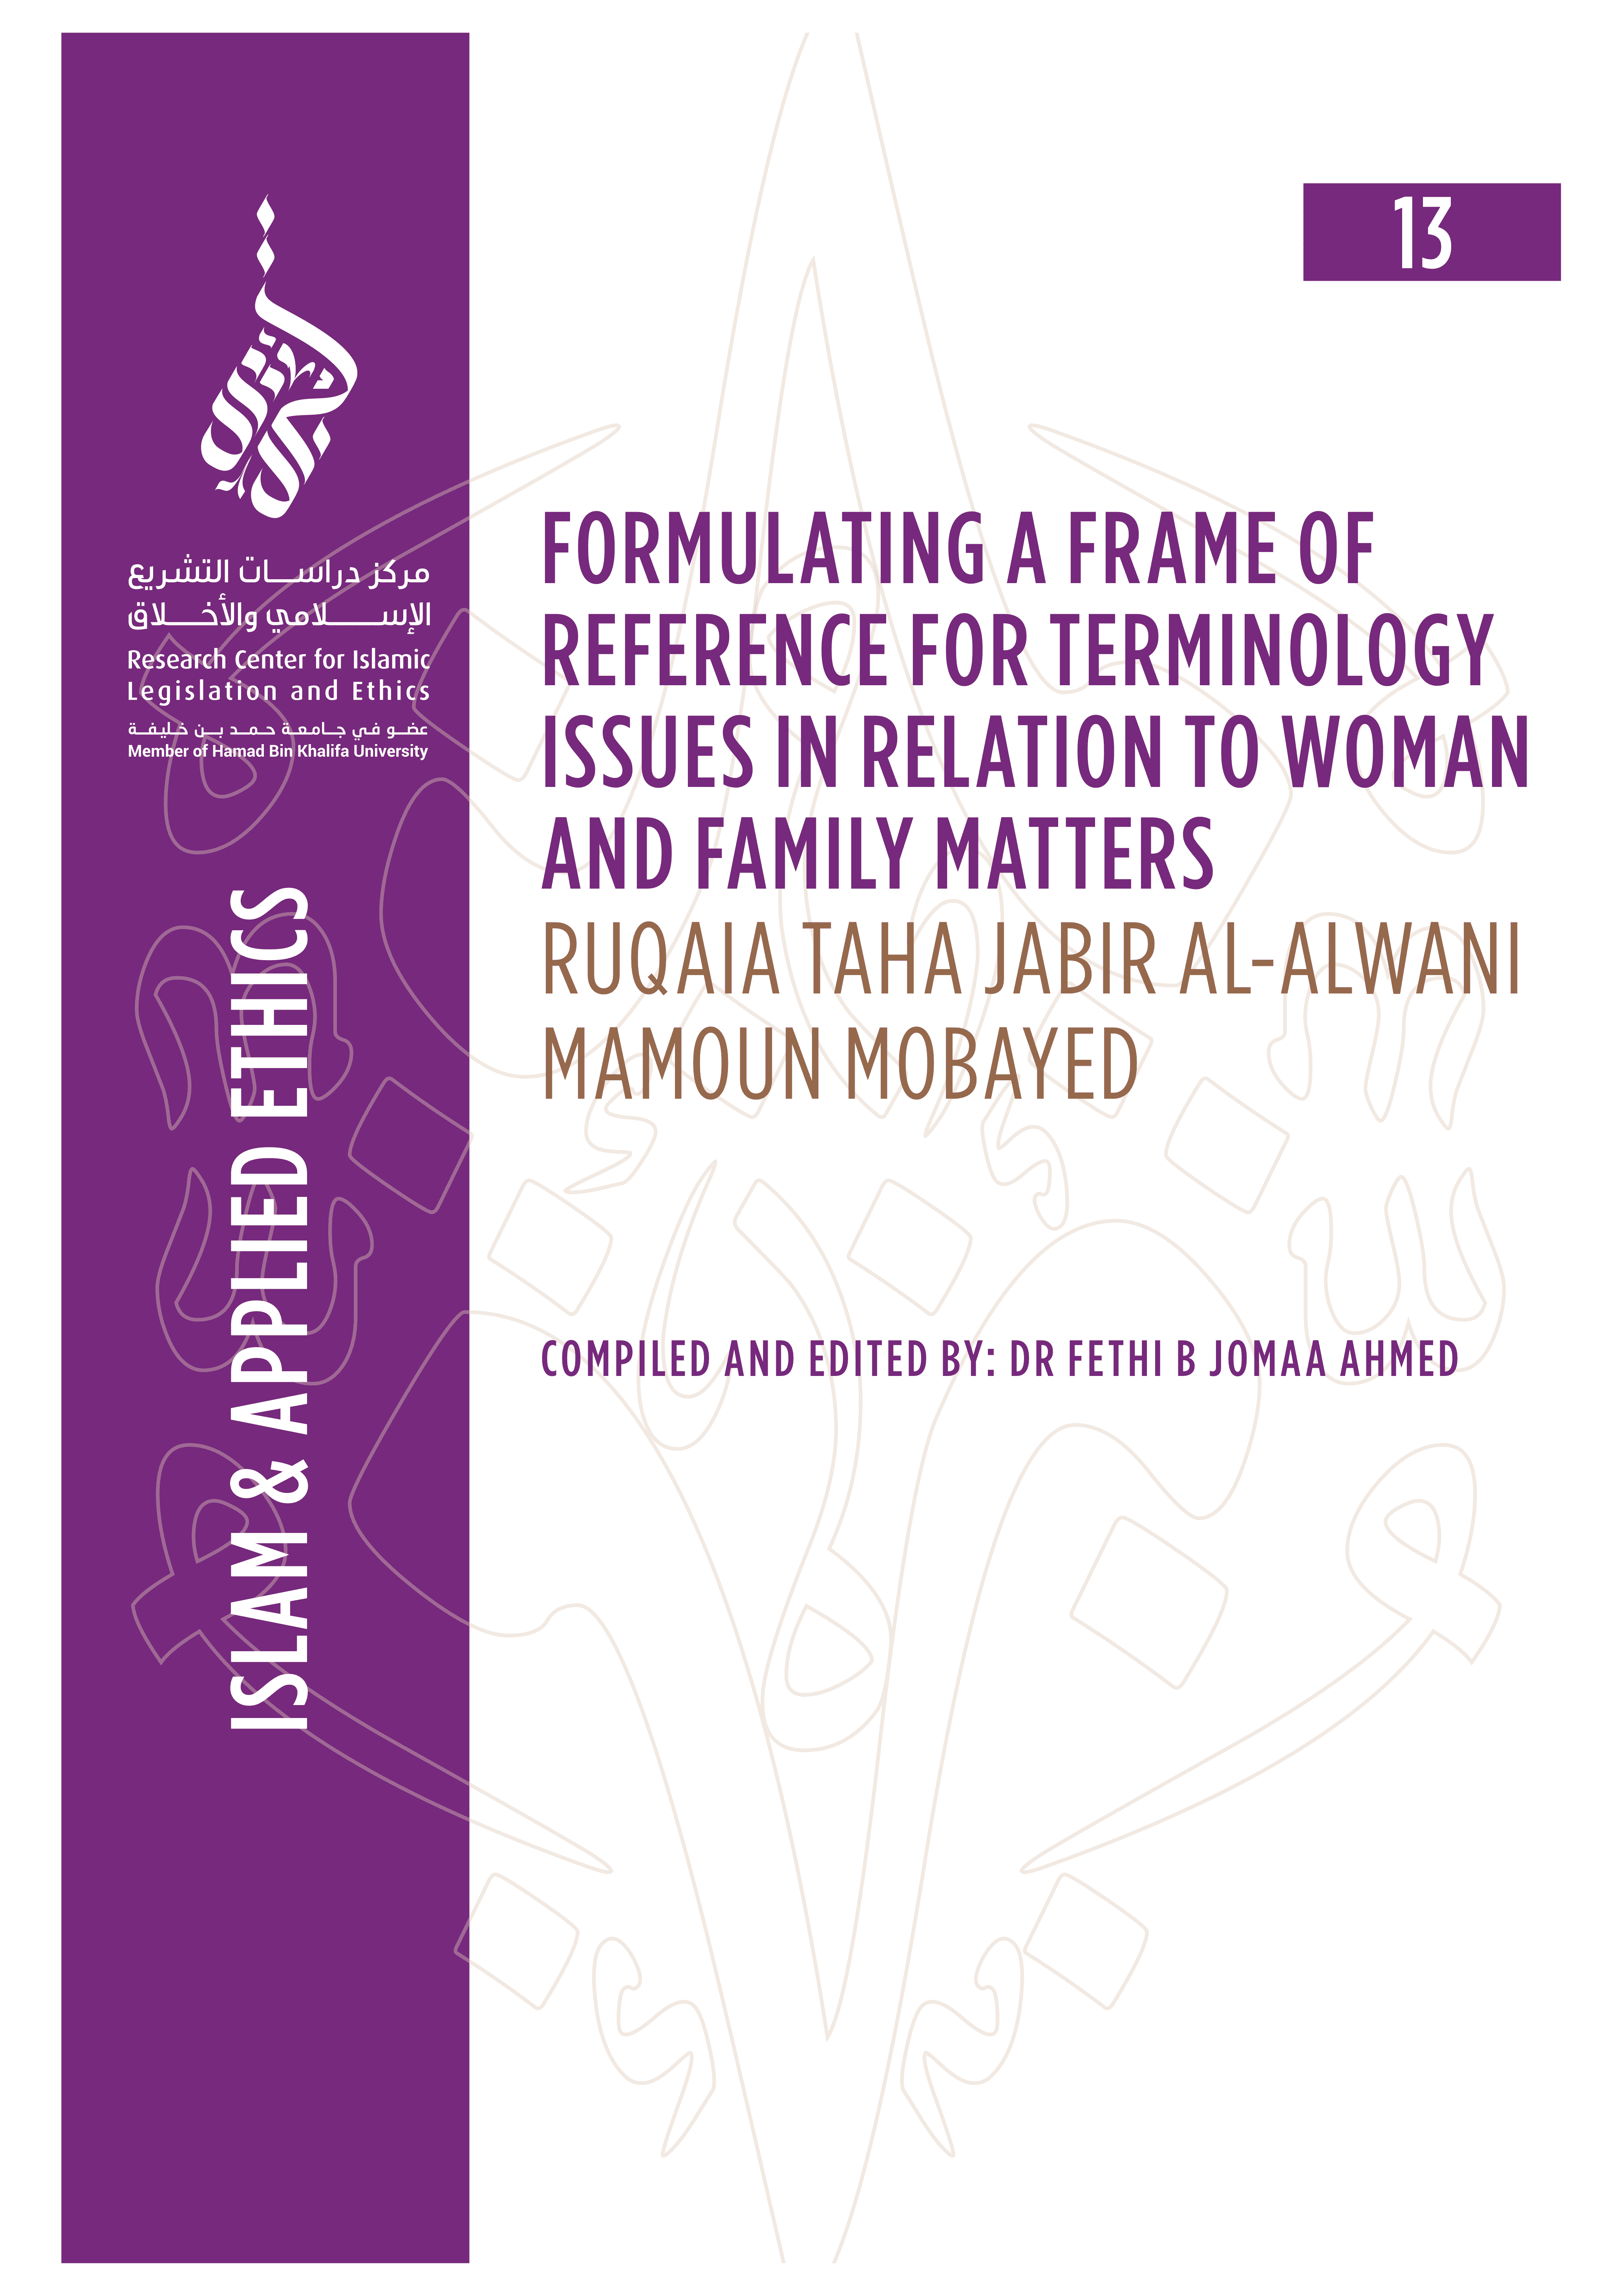 13/14 Formulating A Frame Of Reference For Terminology Issues In Relation To Woman And Family Matters